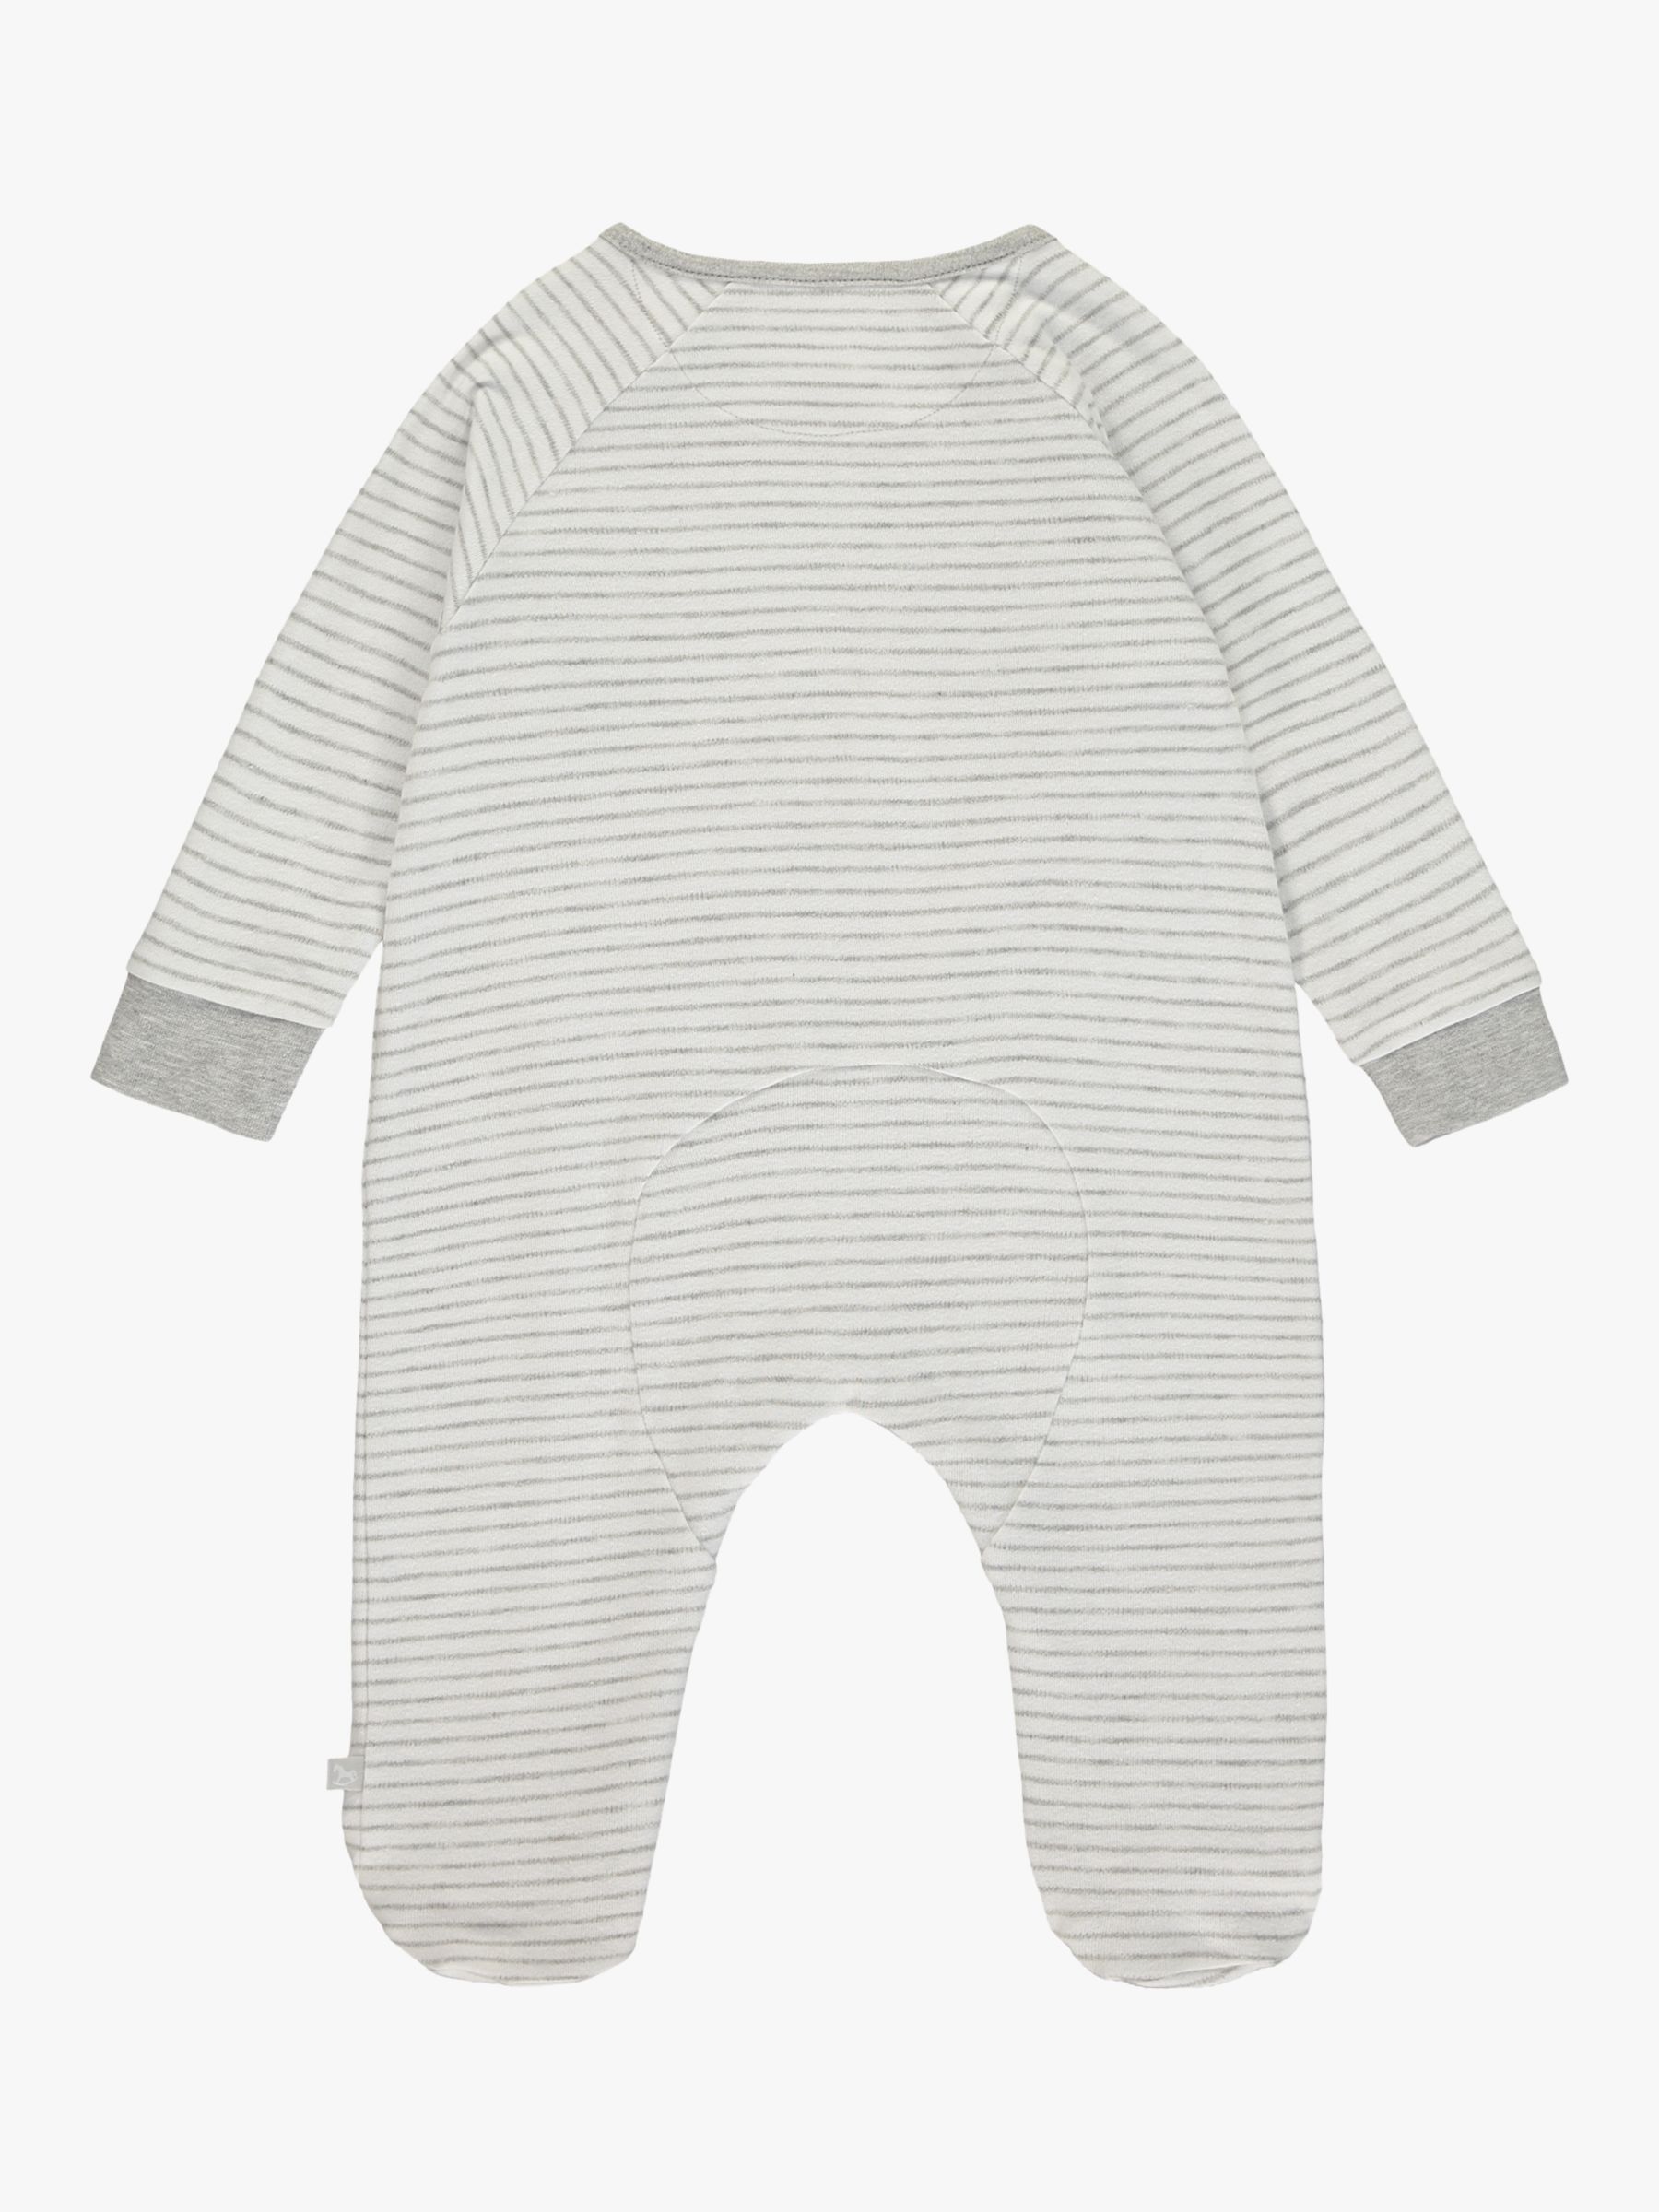 Buy The Little Tailor Baby Rocking Horse Stripe Sleepsuit Online at johnlewis.com